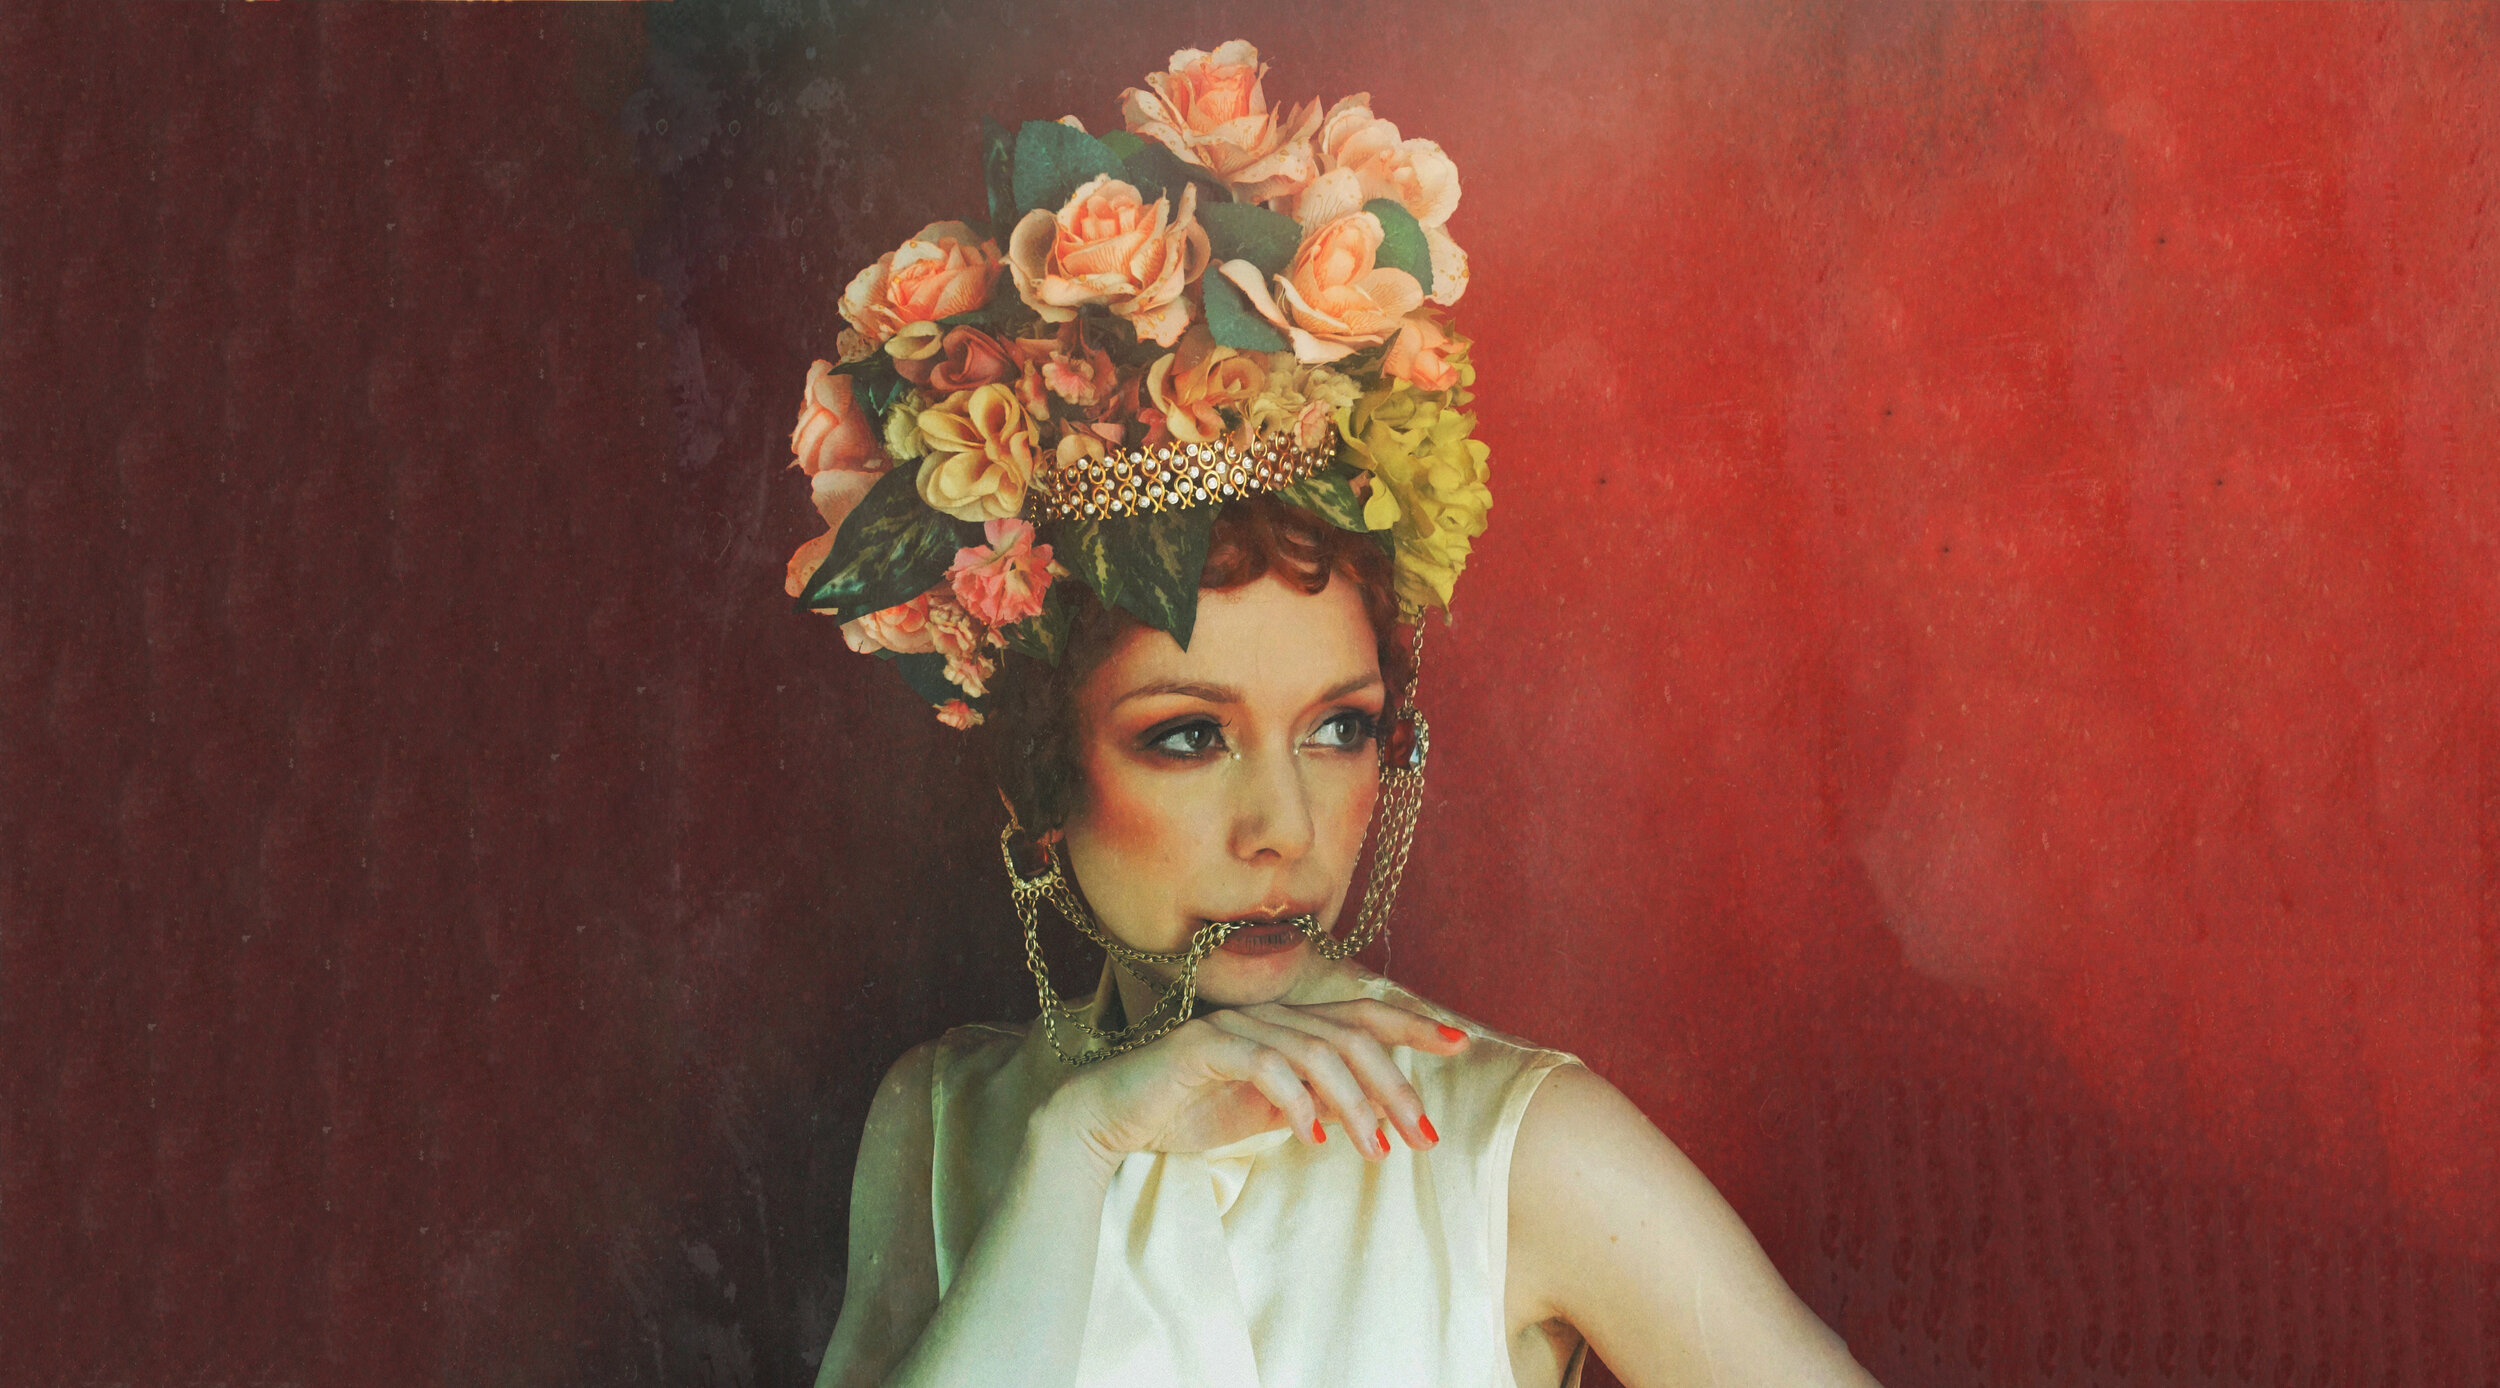  The Anchoress by Jodie Cartman 